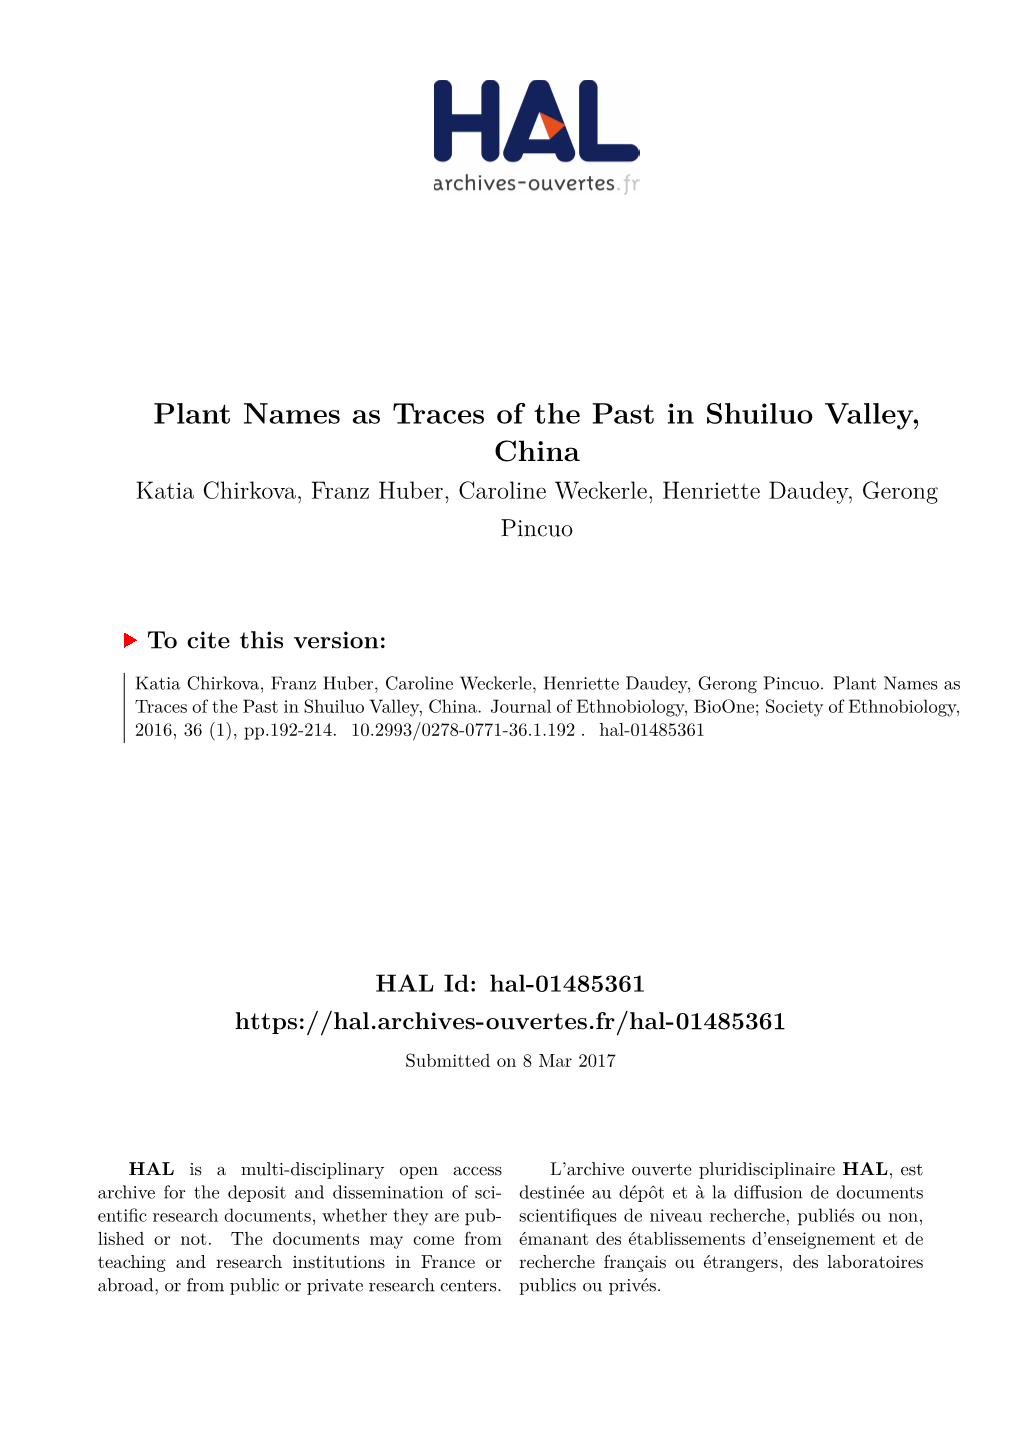 Plant Names As Traces of the Past in Shuiluo Valley, China Katia Chirkova, Franz Huber, Caroline Weckerle, Henriette Daudey, Gerong Pincuo